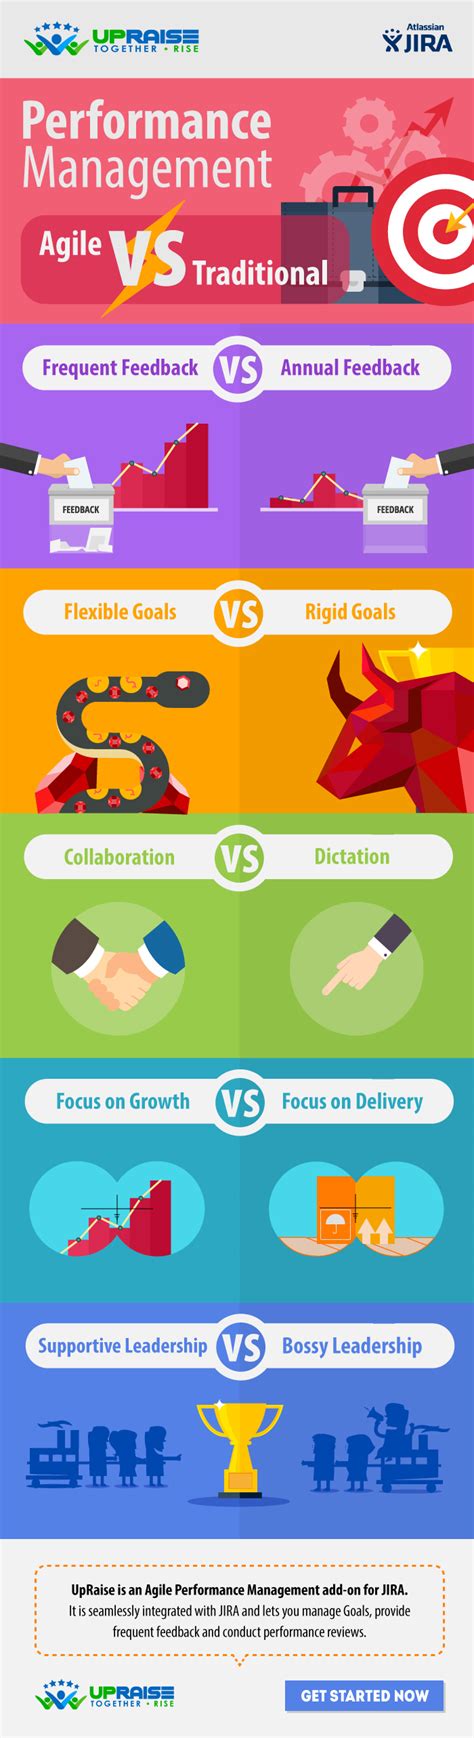 Traditional Vs Agile Performance Management Infographic